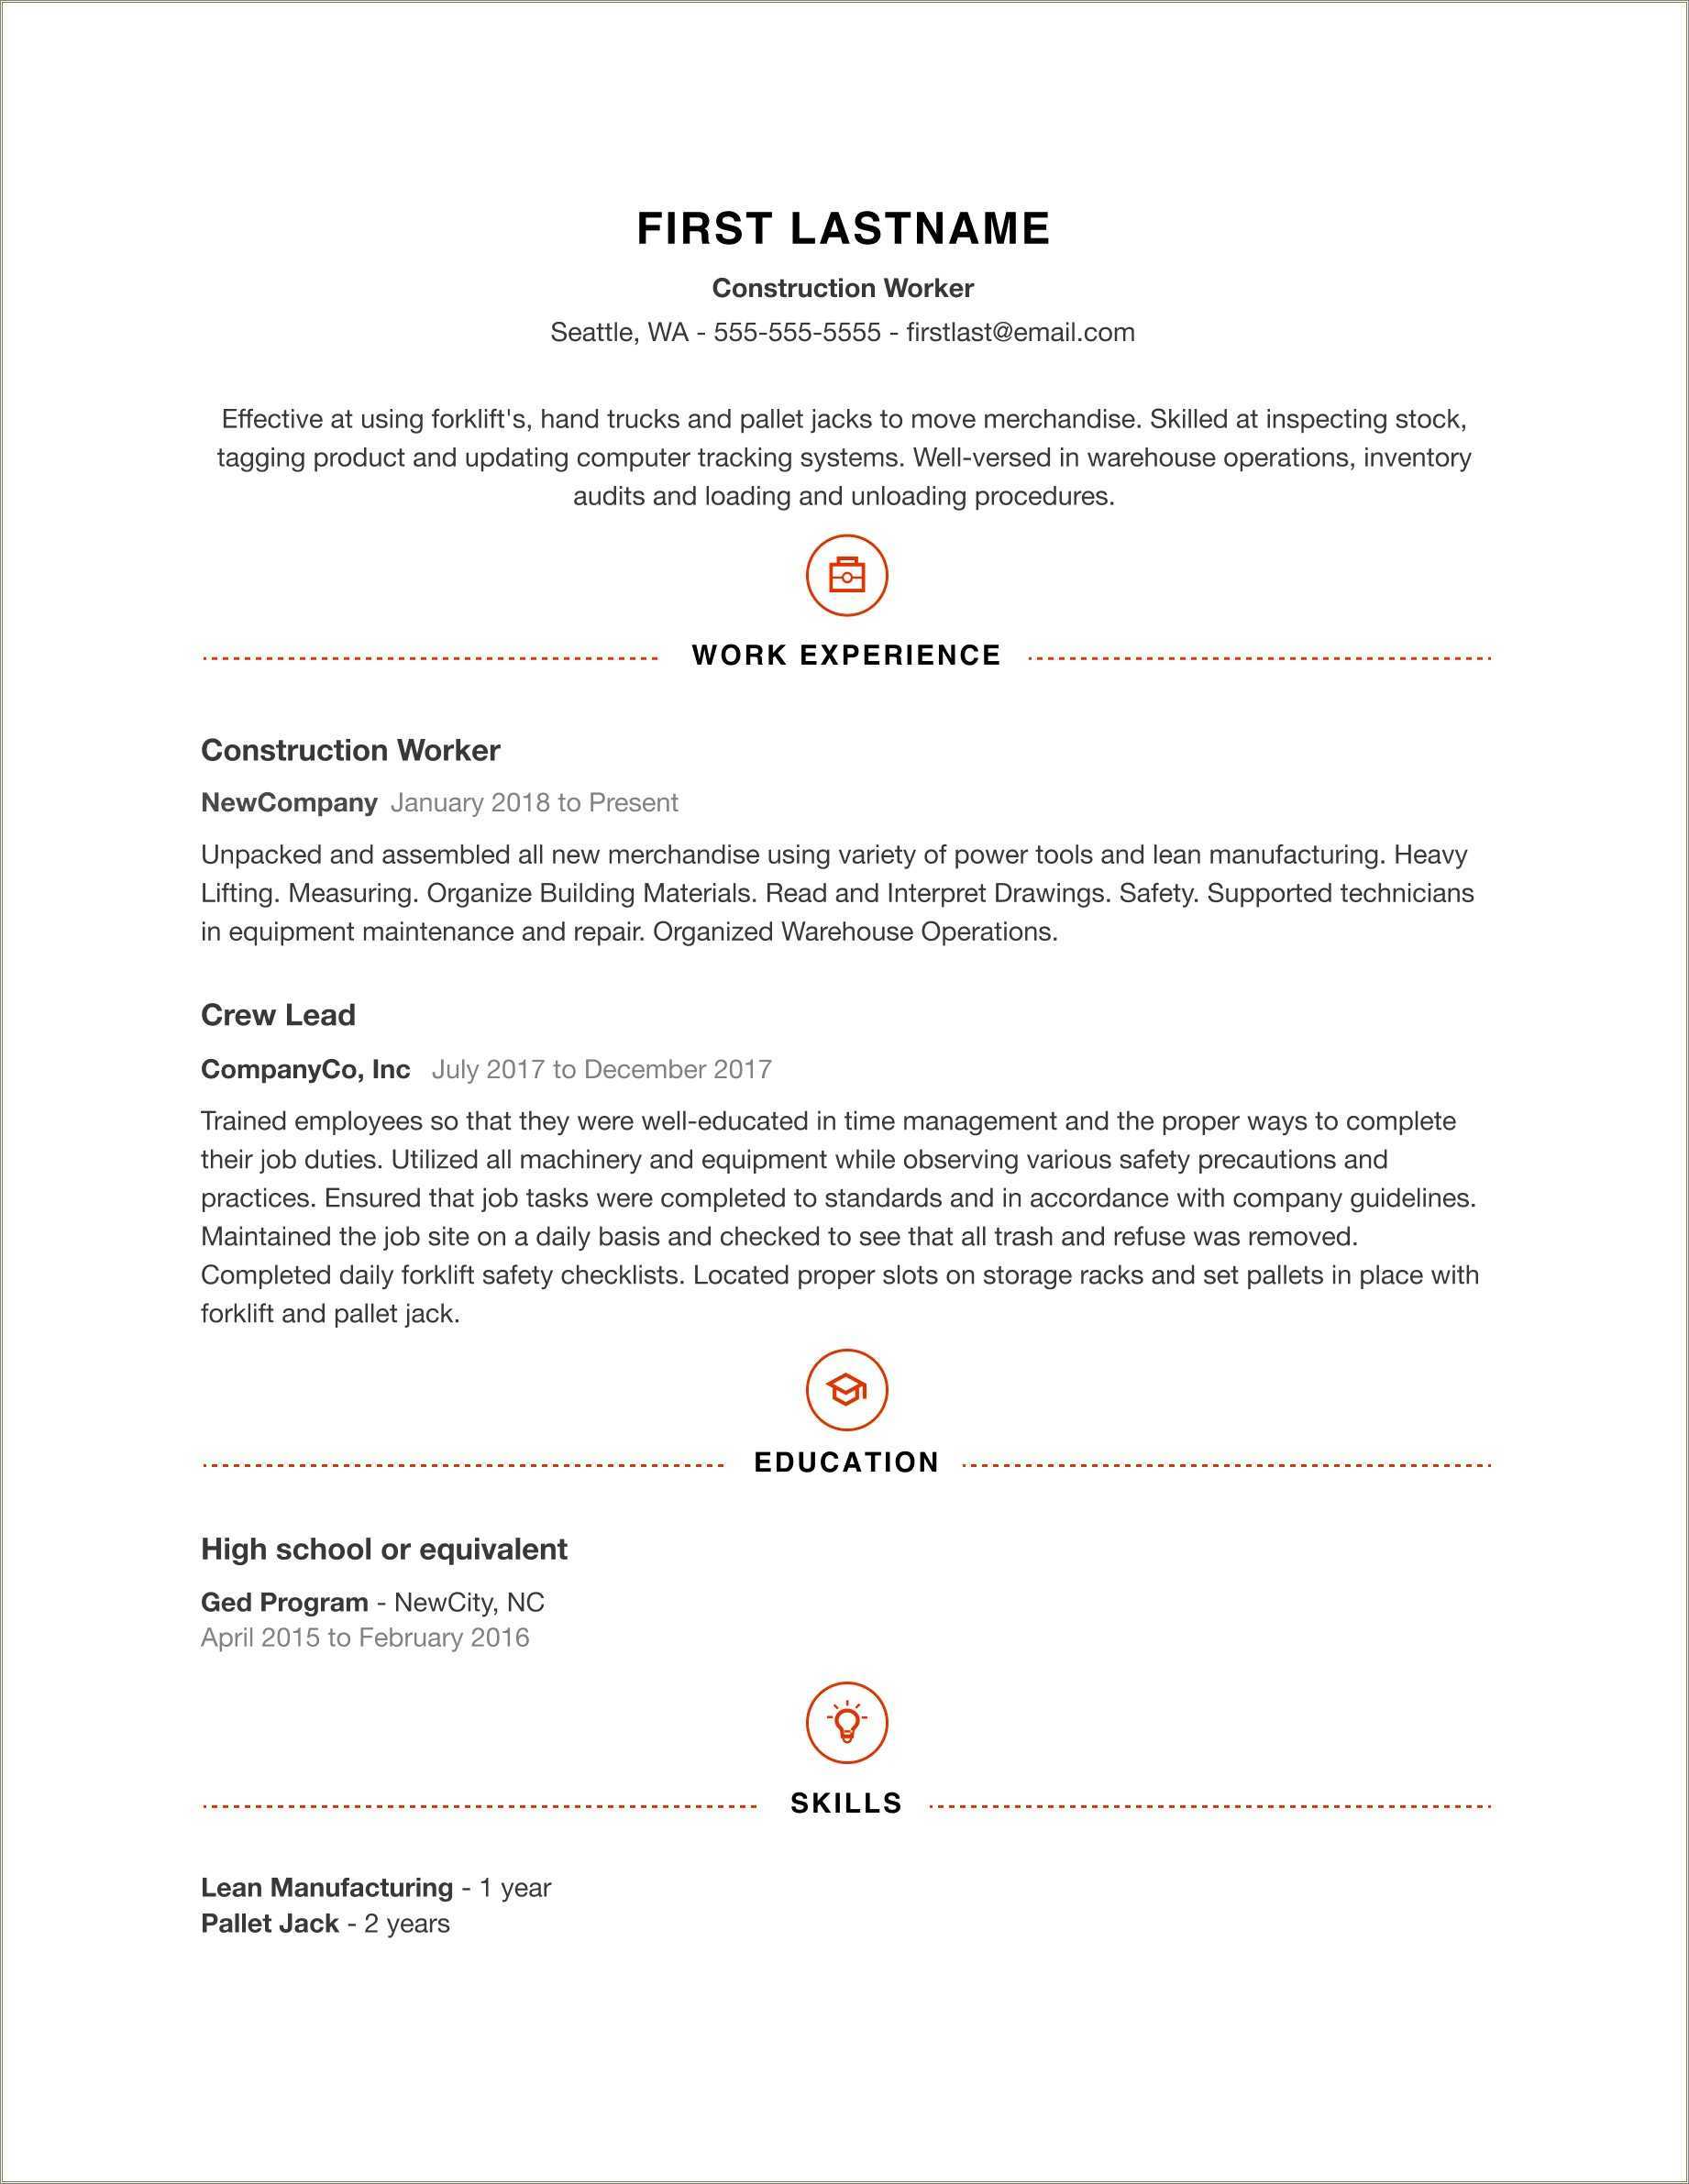 is-there-any-free-resume-builders-resume-example-gallery